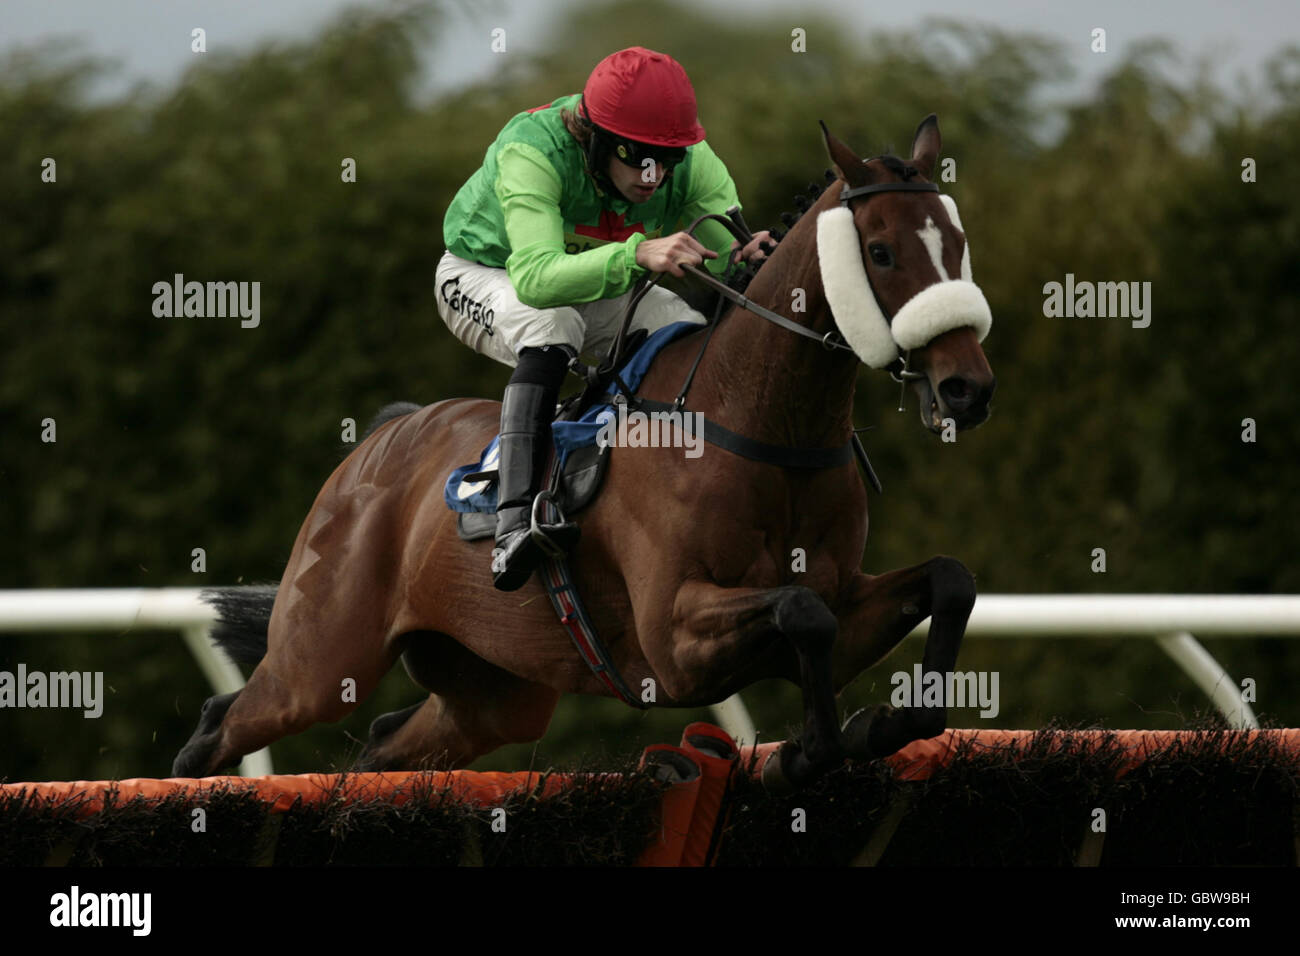 Horse Racing - Wye Valley Brewery Day - Hereford Racecourse. Gan Eagla ridden by Christian Williams during the Dorothy Goodbody's Claiming Hurdle Stock Photo